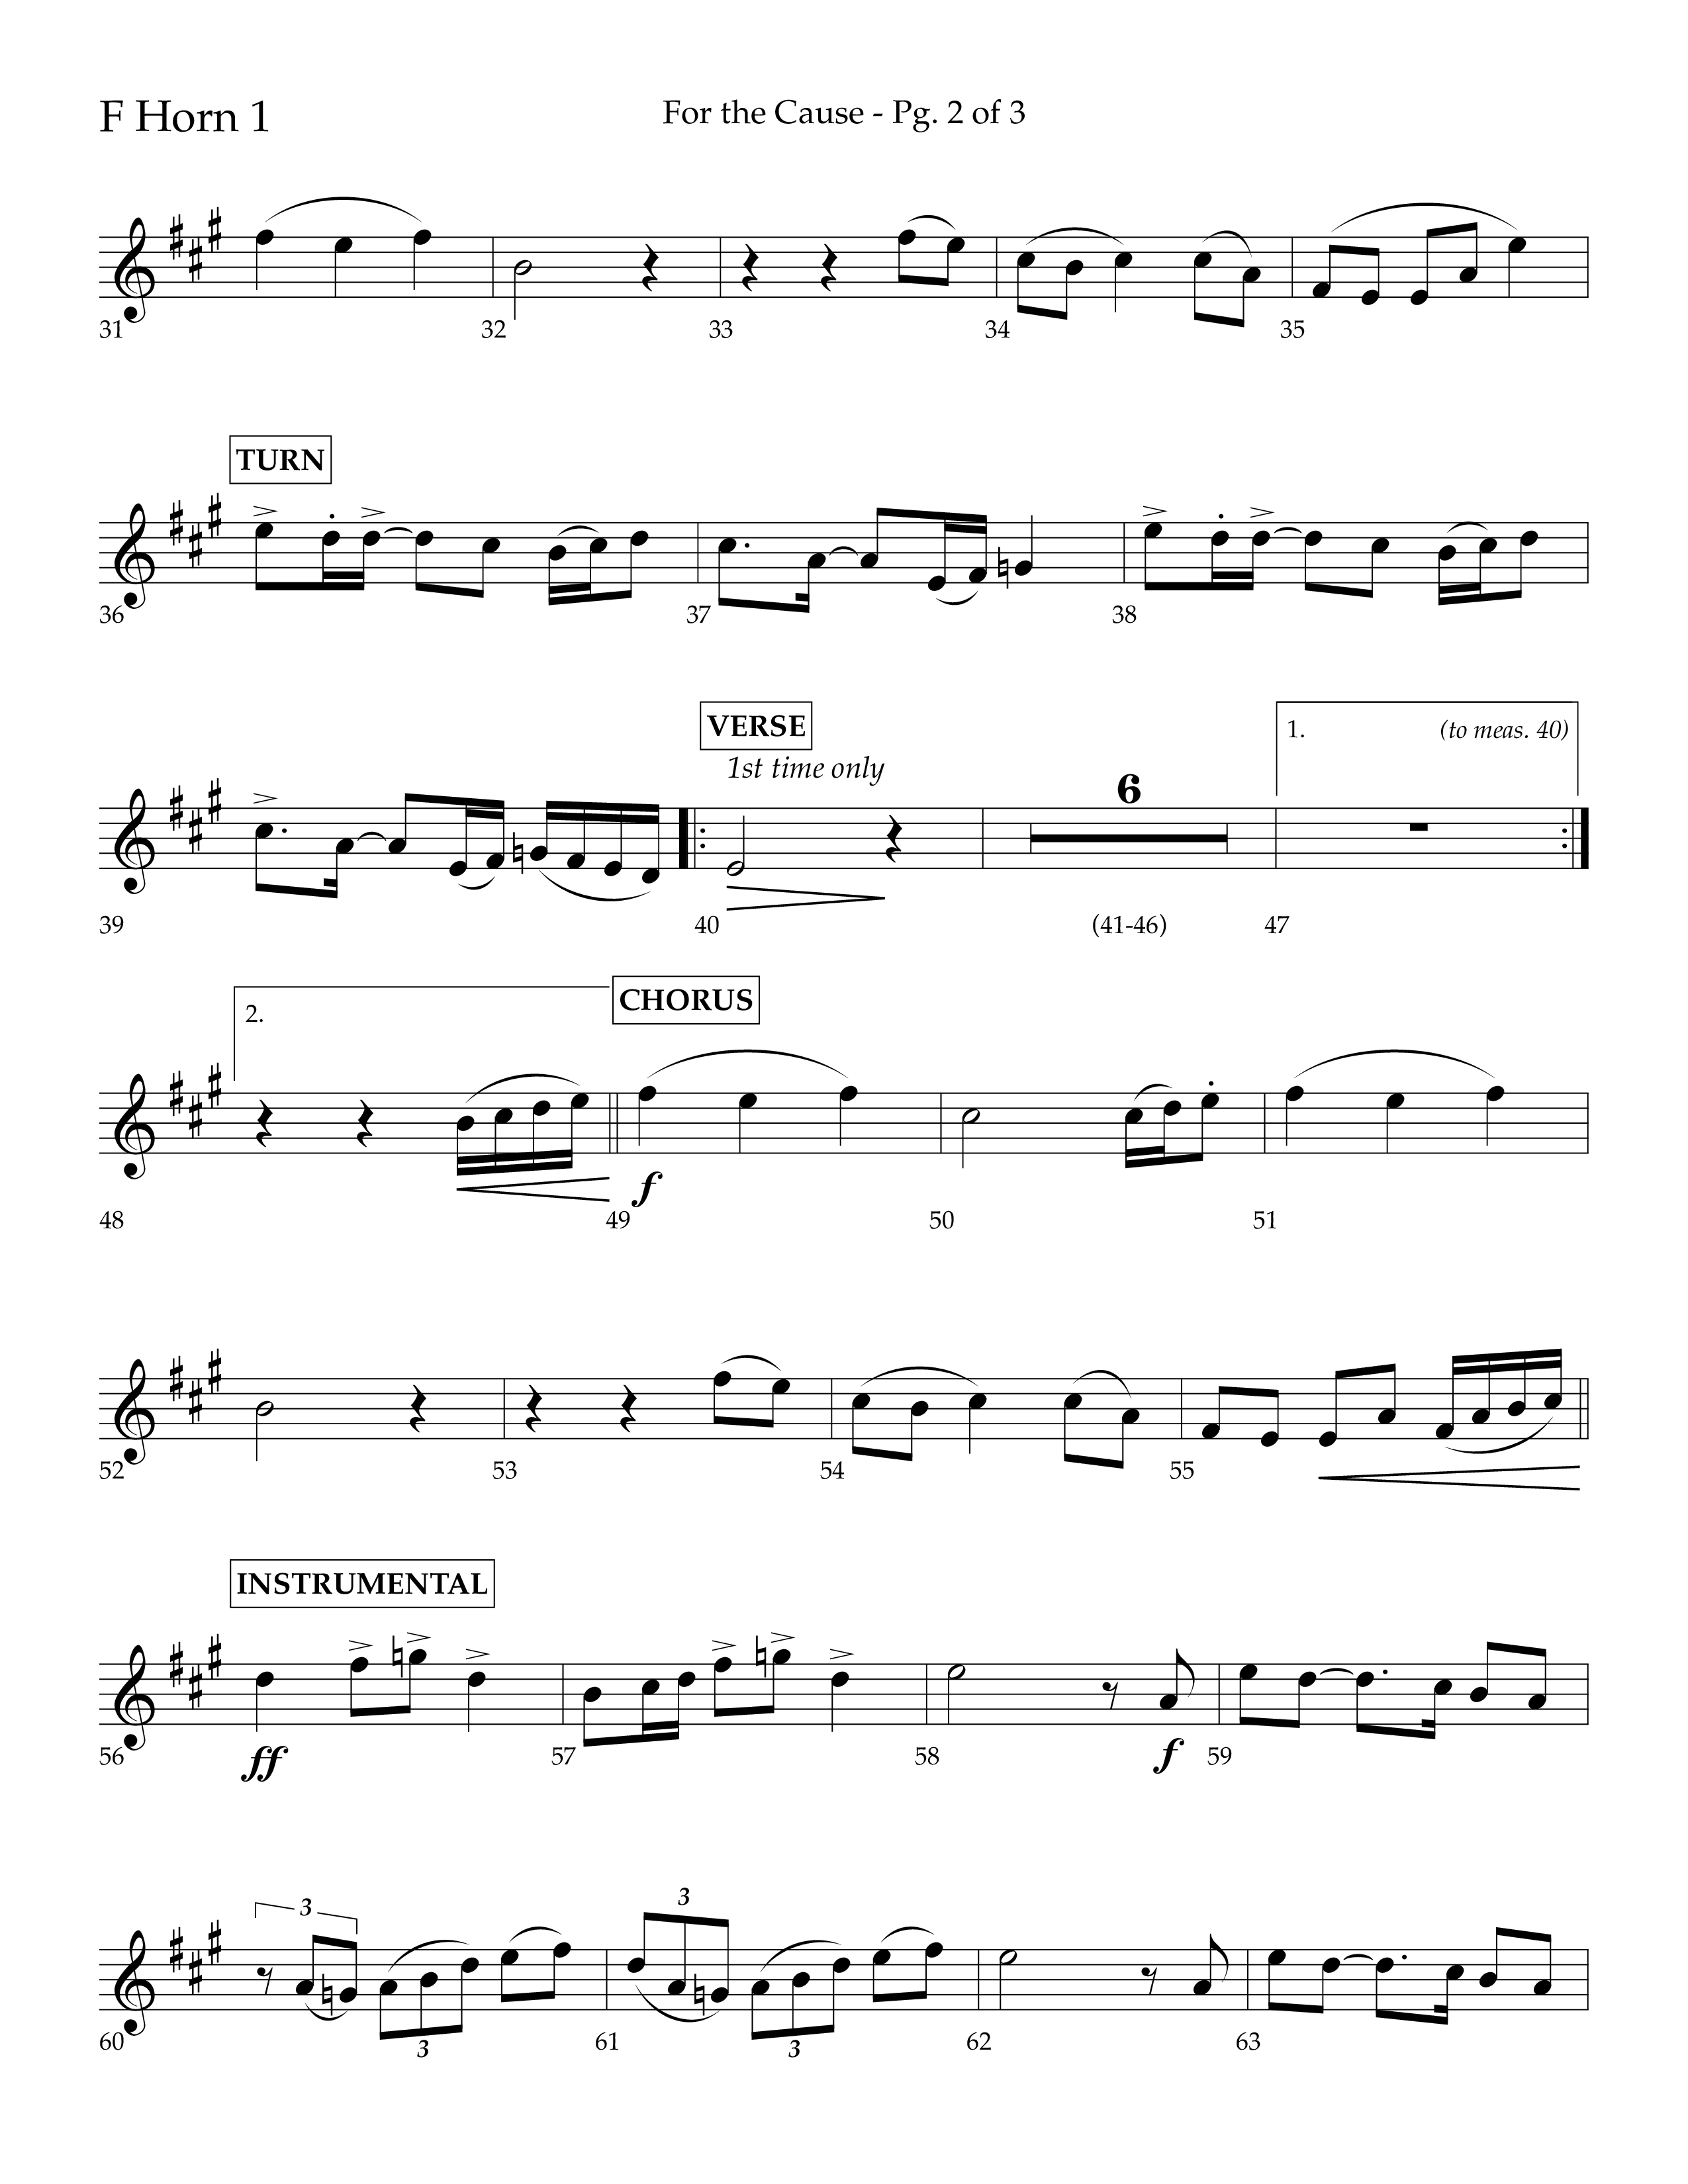 For The Cause (Choral Anthem SATB) French Horn (Lifeway Choral / Arr. David Hamilton)